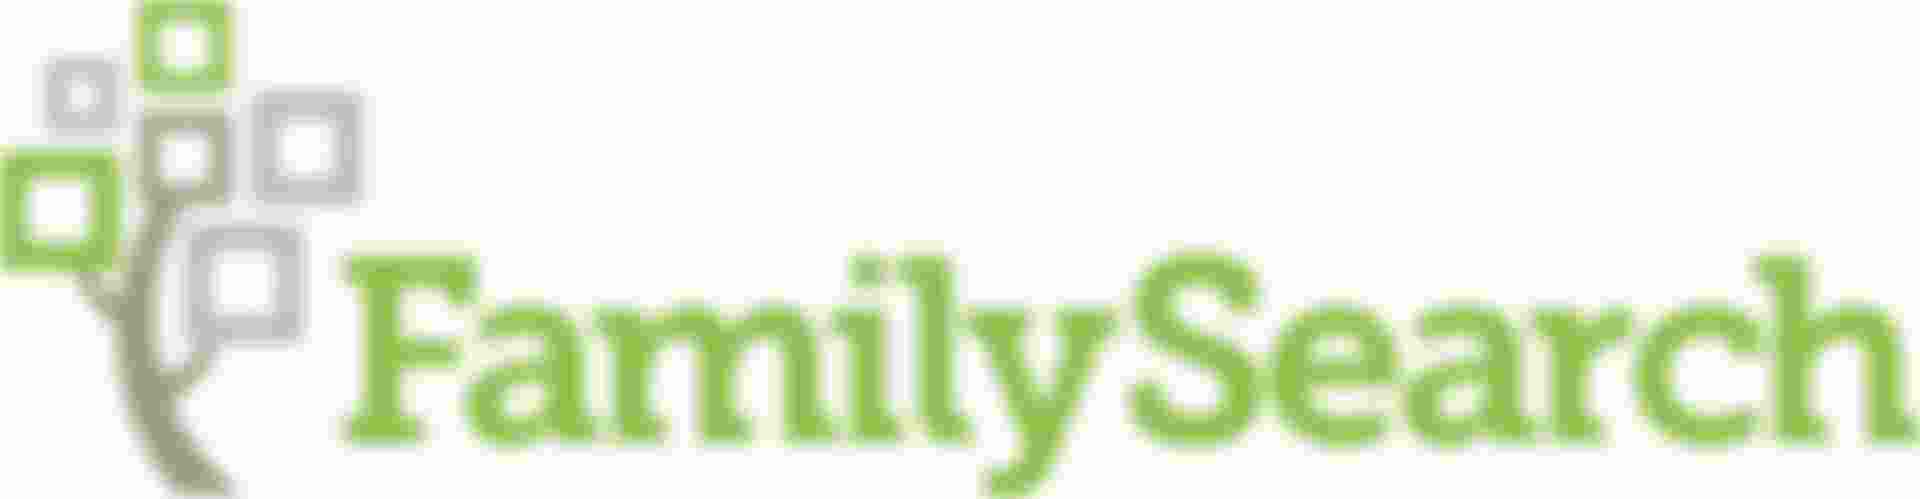 FamilySearch (Inside Central Library Only) logo